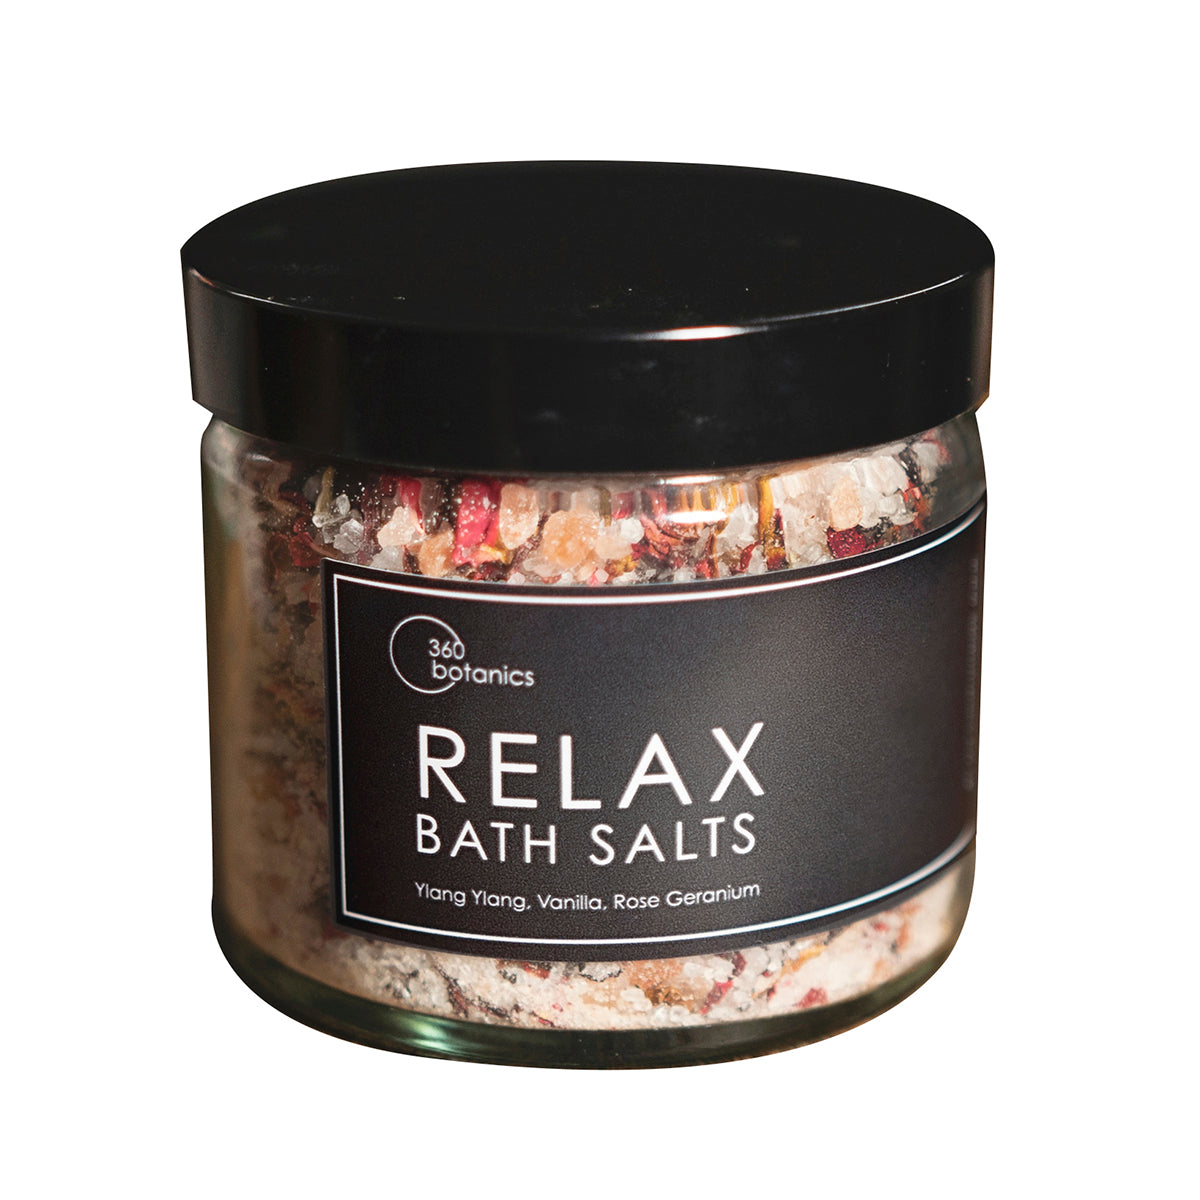 A transparent jar with a black lid labeled "RELAX Bath Salts" from 360 Botanics, filled with a mix of coarse bath salts and botanical pieces. The label also lists Ylang Ylang, Vanilla, and Rose Geranium as the scents, set against a white backdrop for clarity.